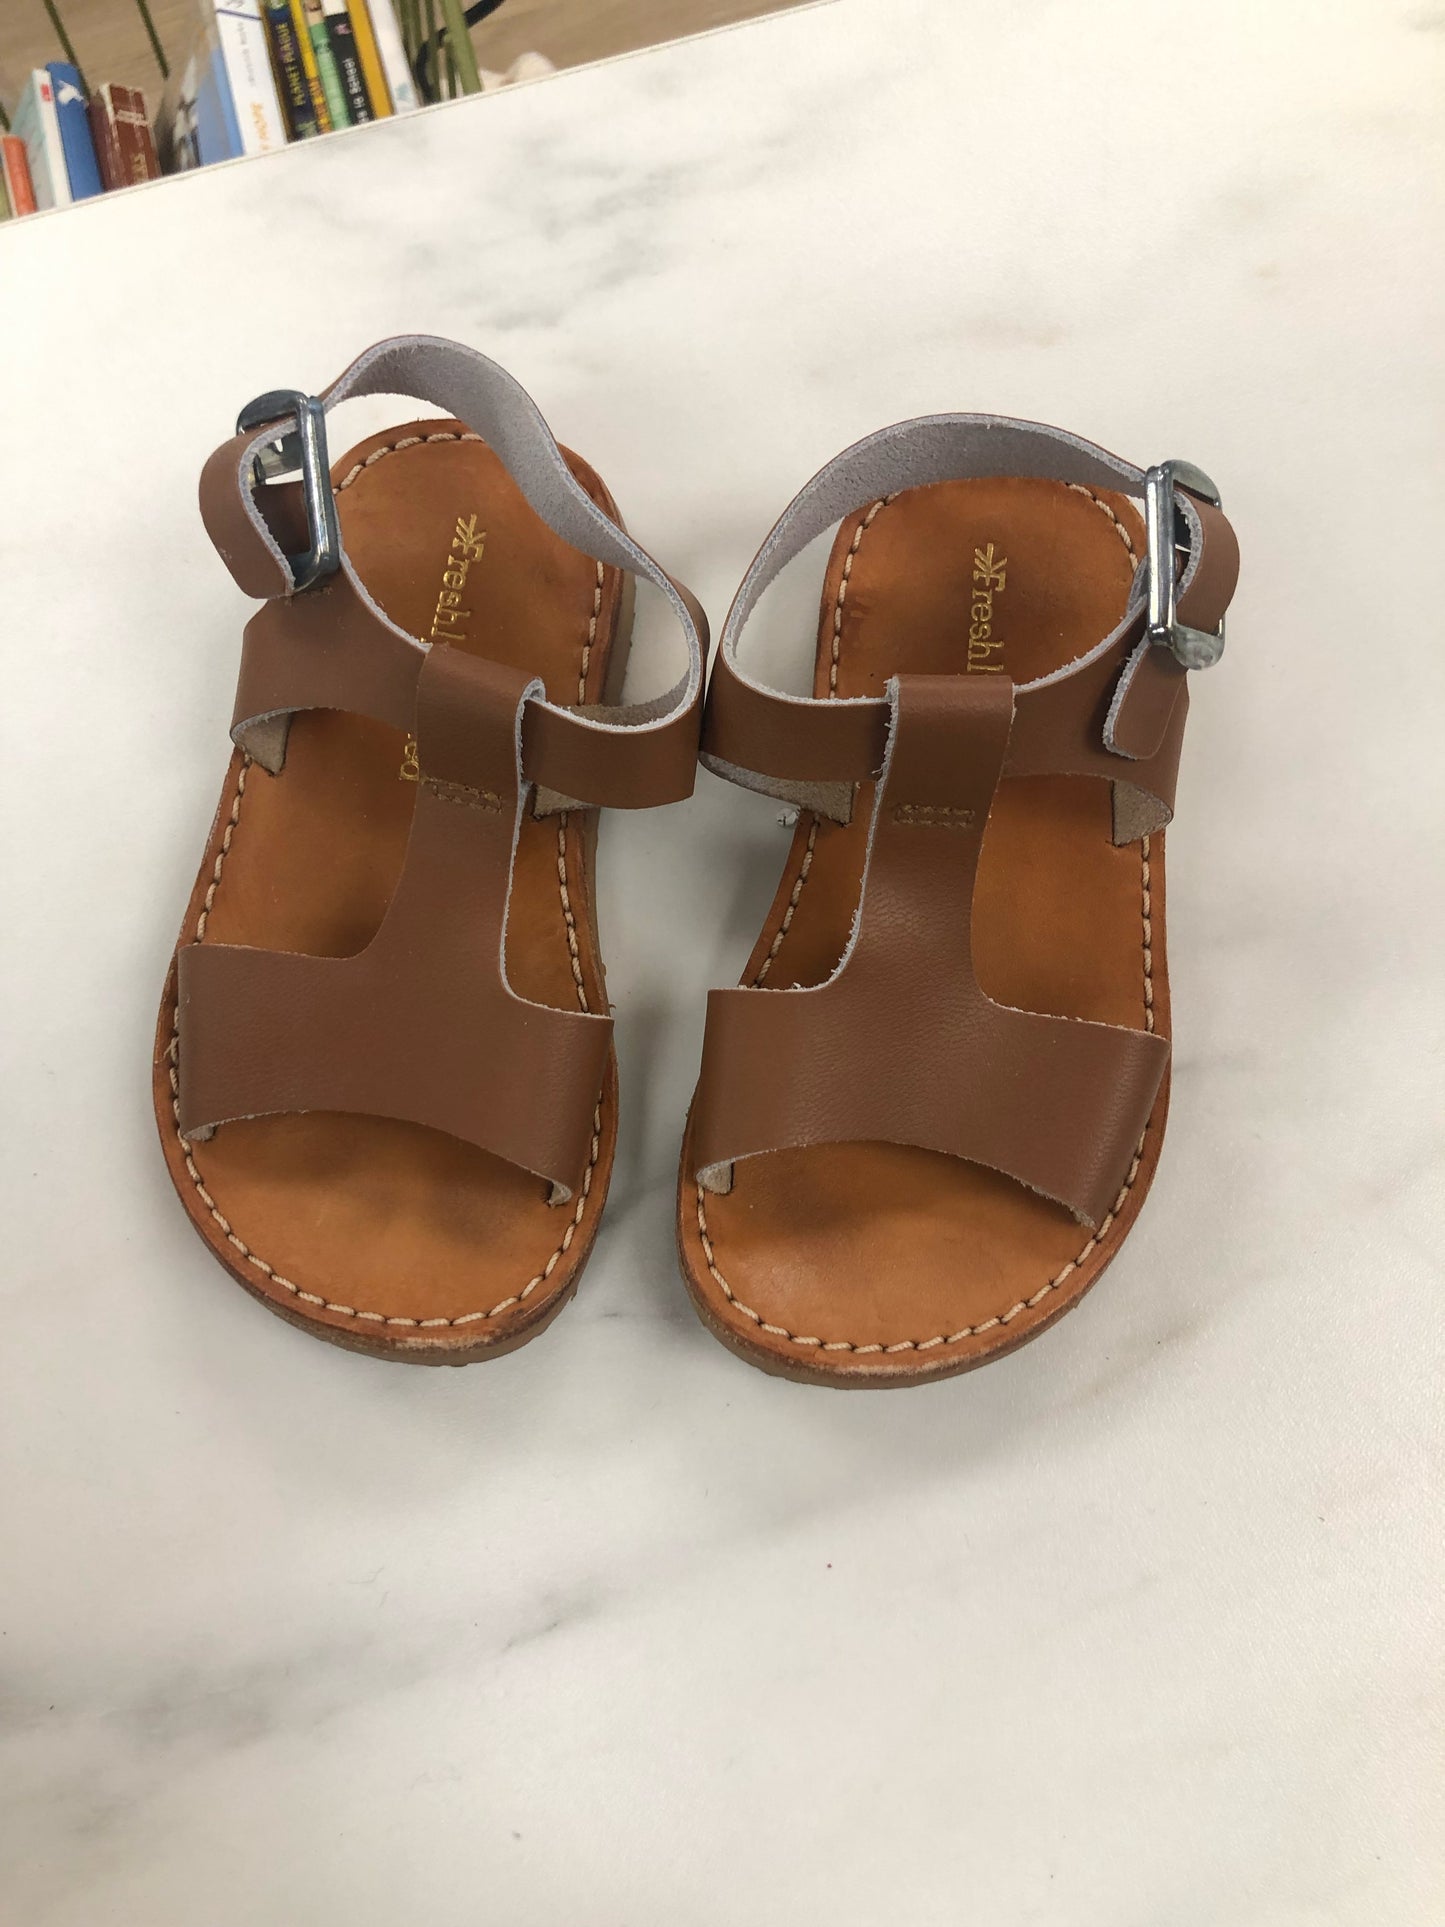 Freshly Picked Child Size 5 tan Leather Shoes/Boots